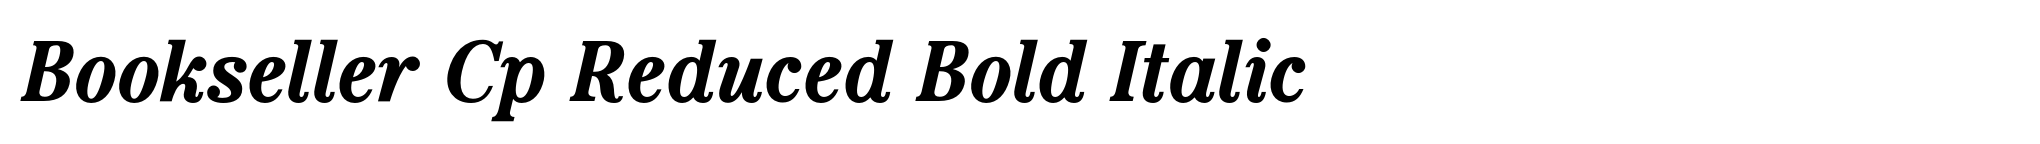 Bookseller Cp Reduced Bold Italic image